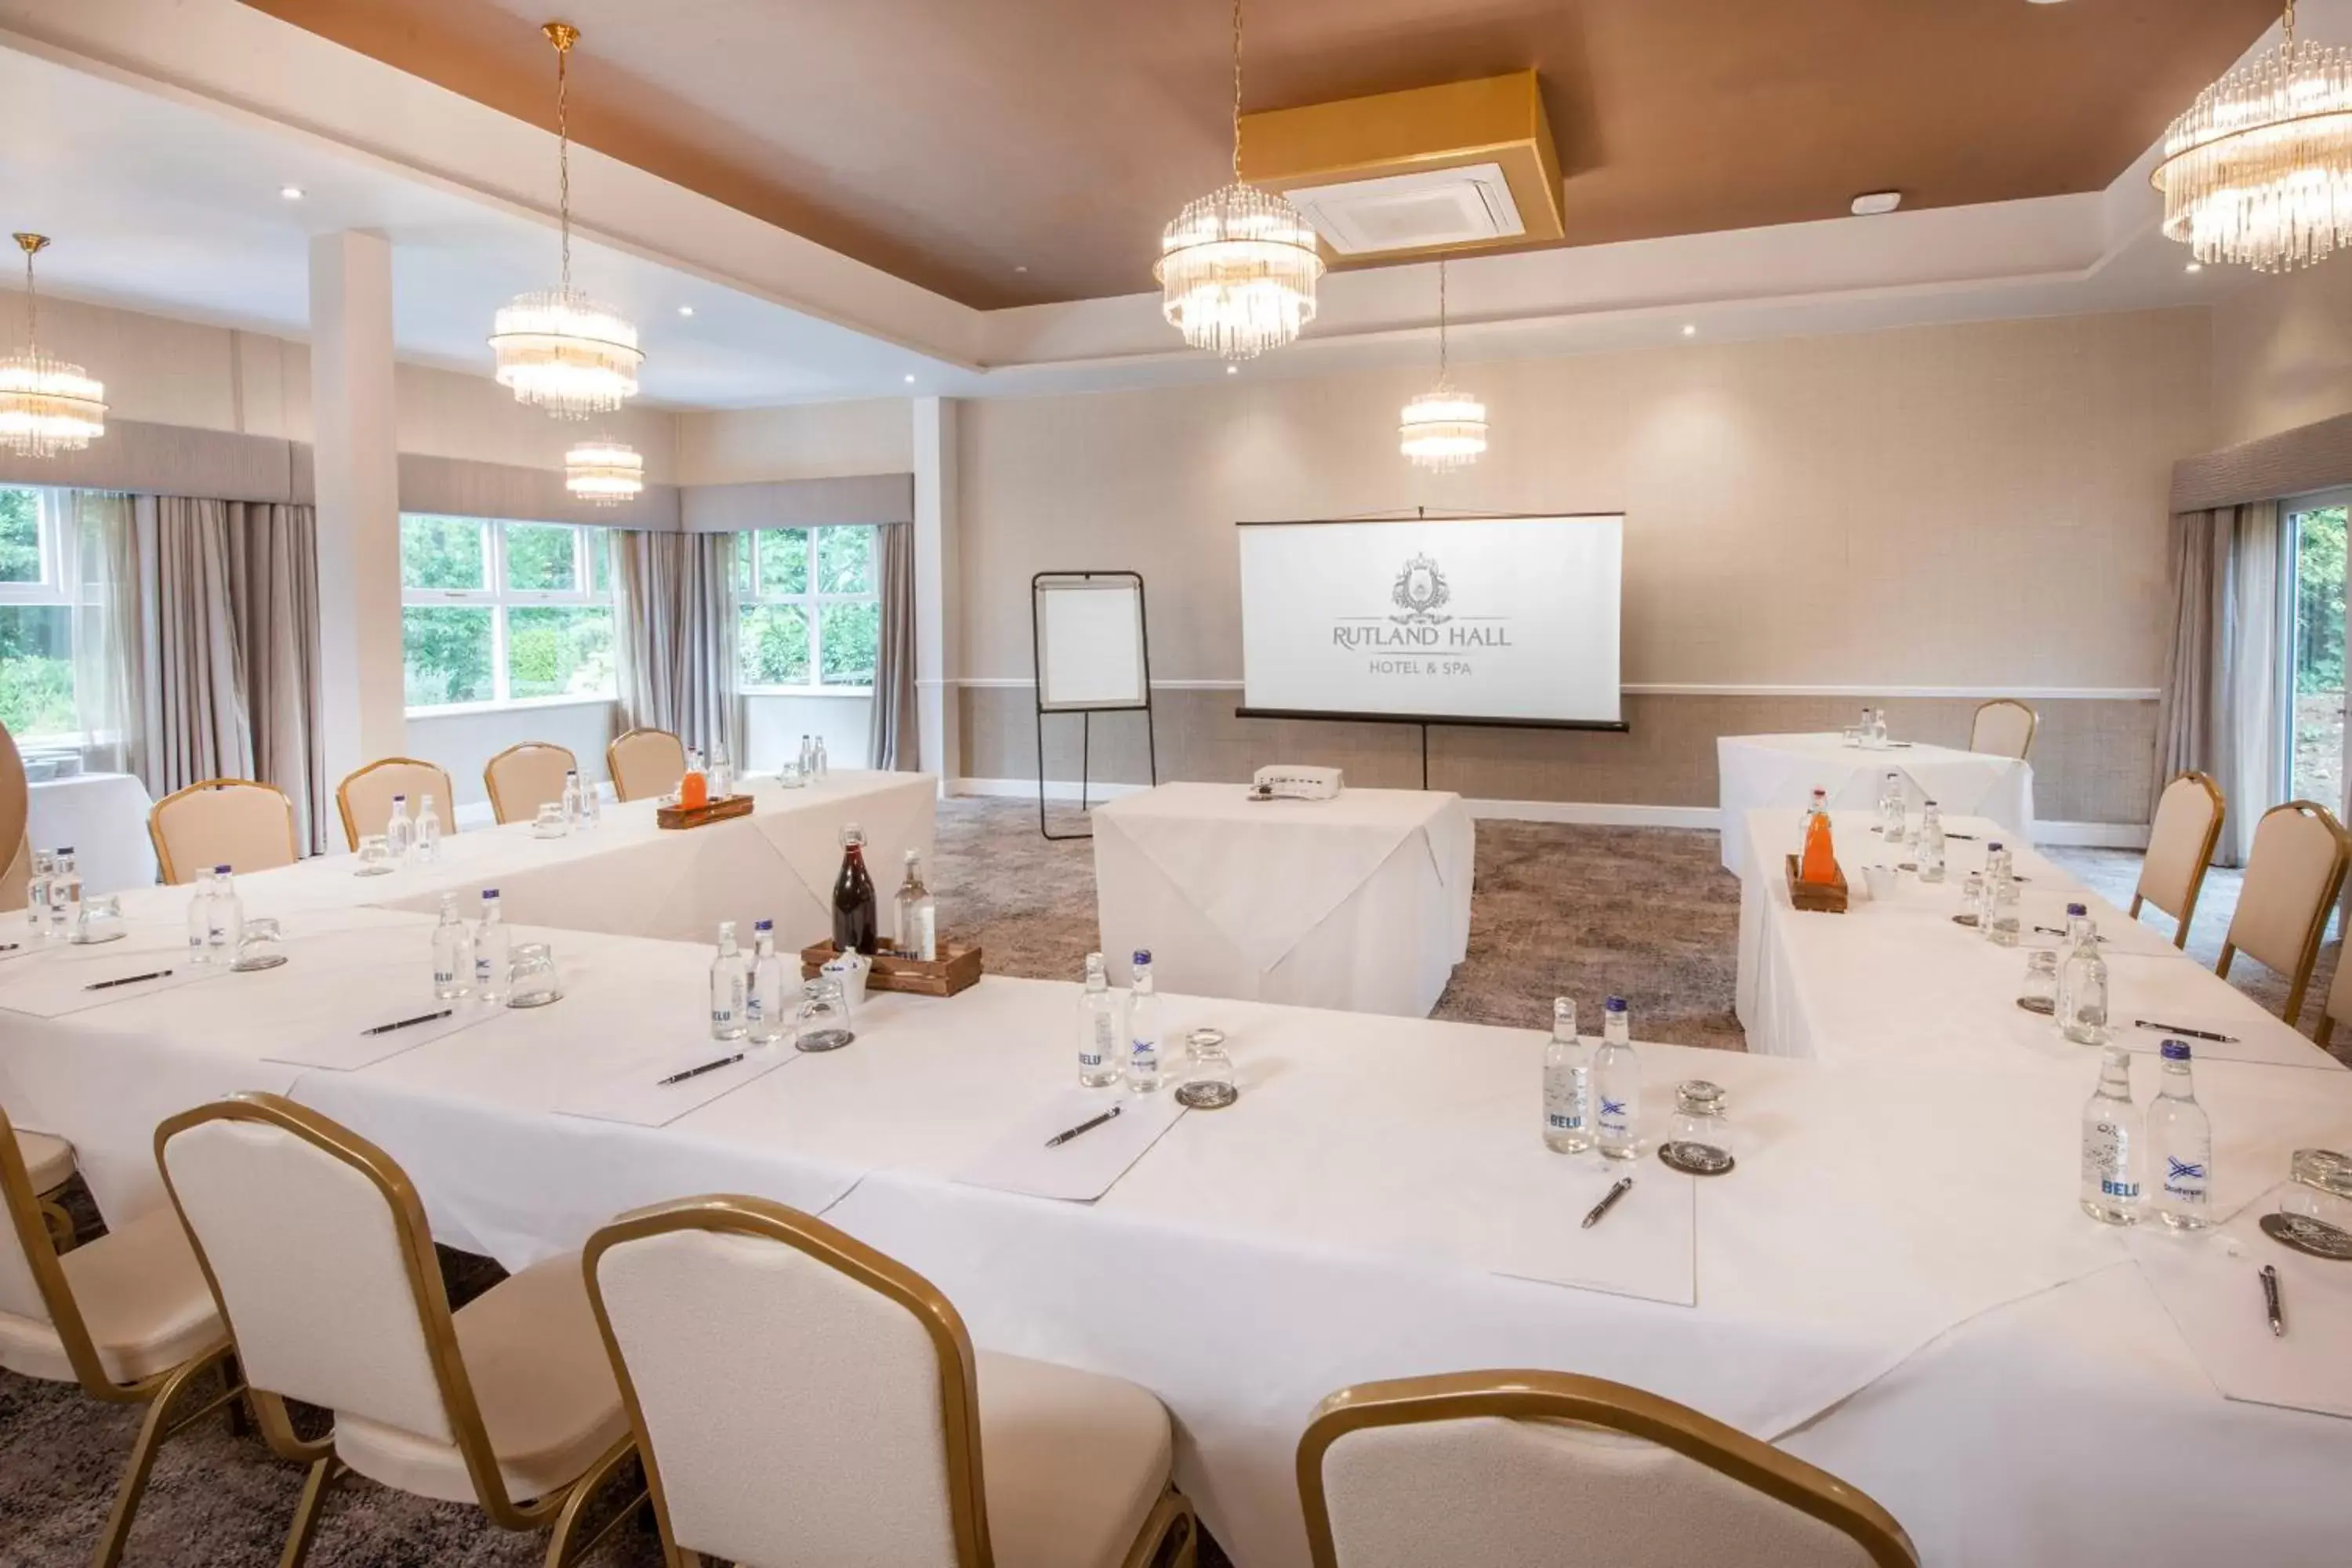 Meeting/conference room in Rutland Hall Hotel